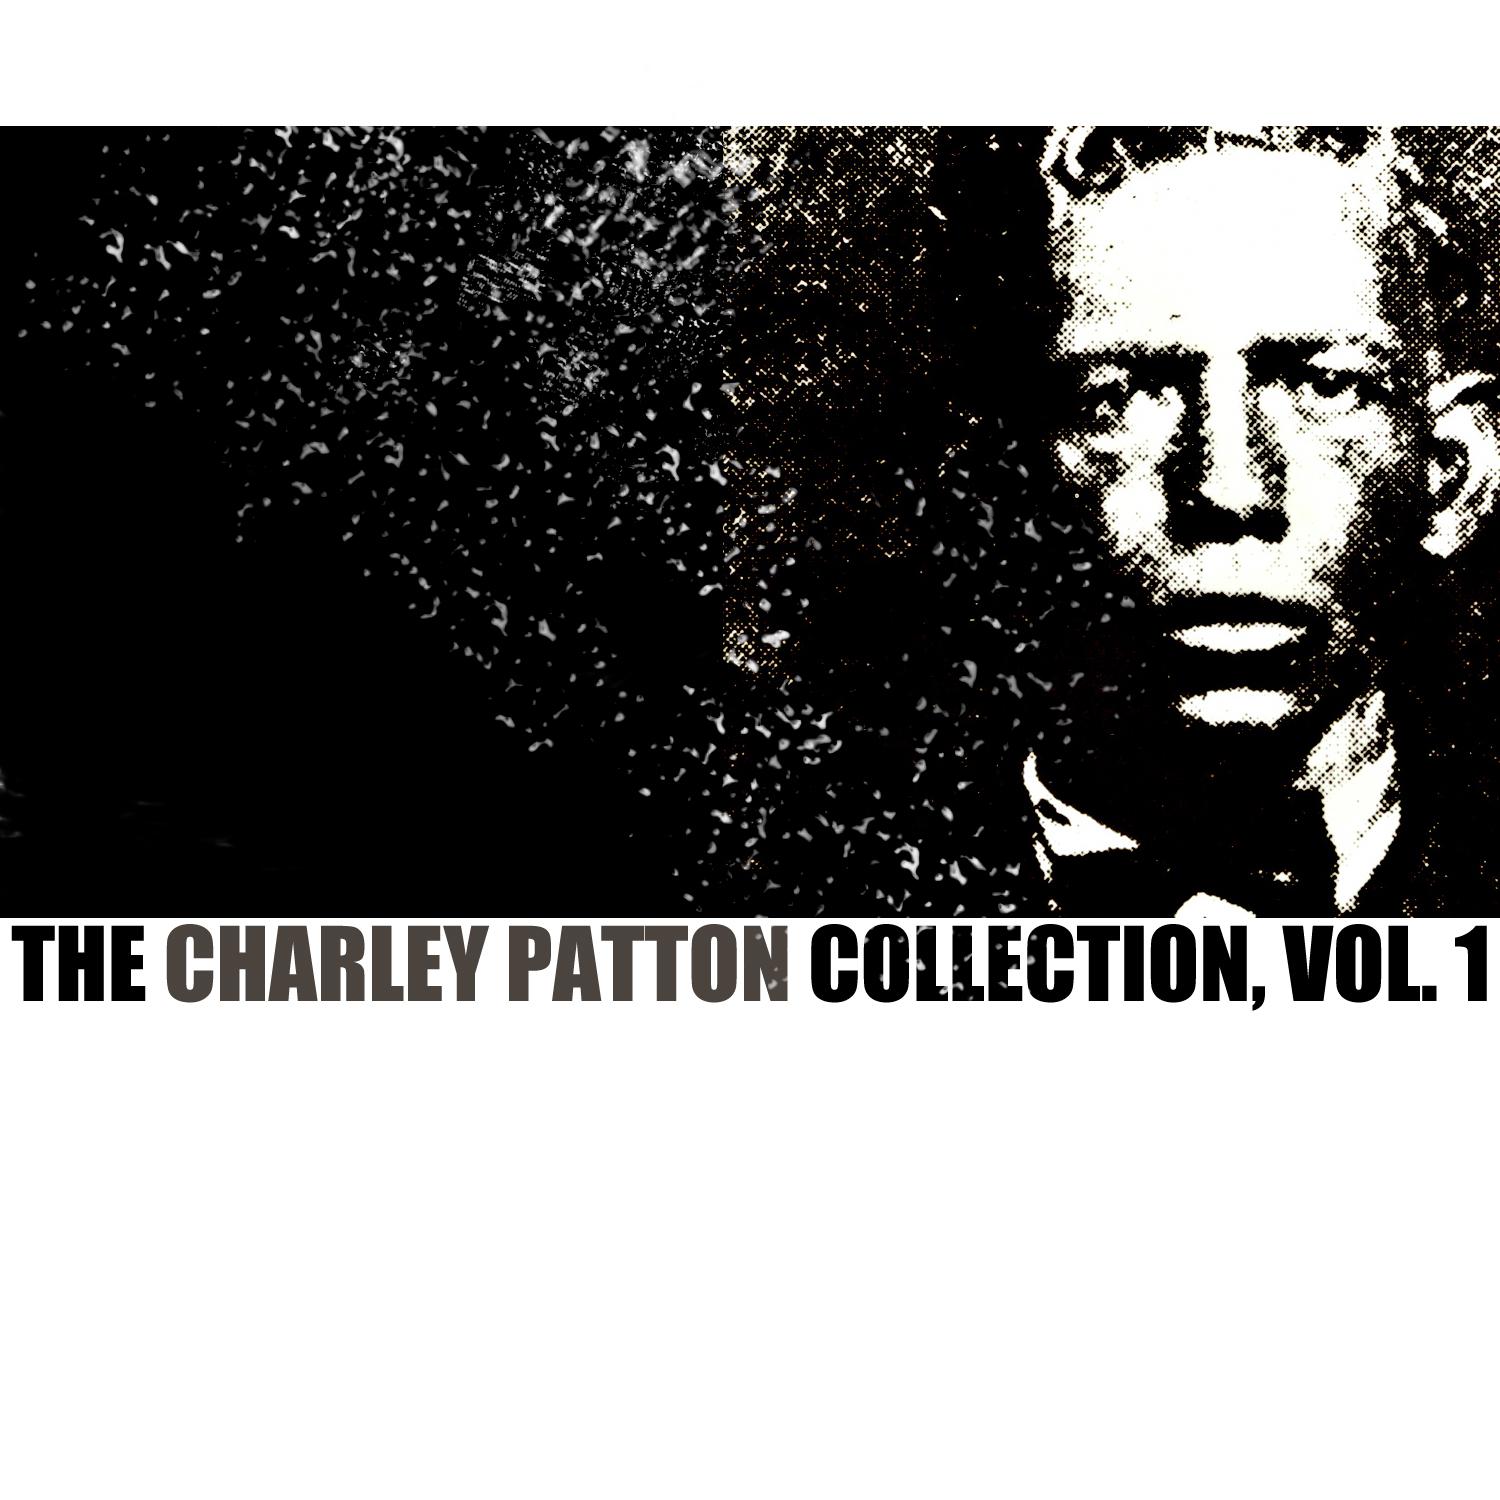 The Charley Patton Collection, Vol. 1